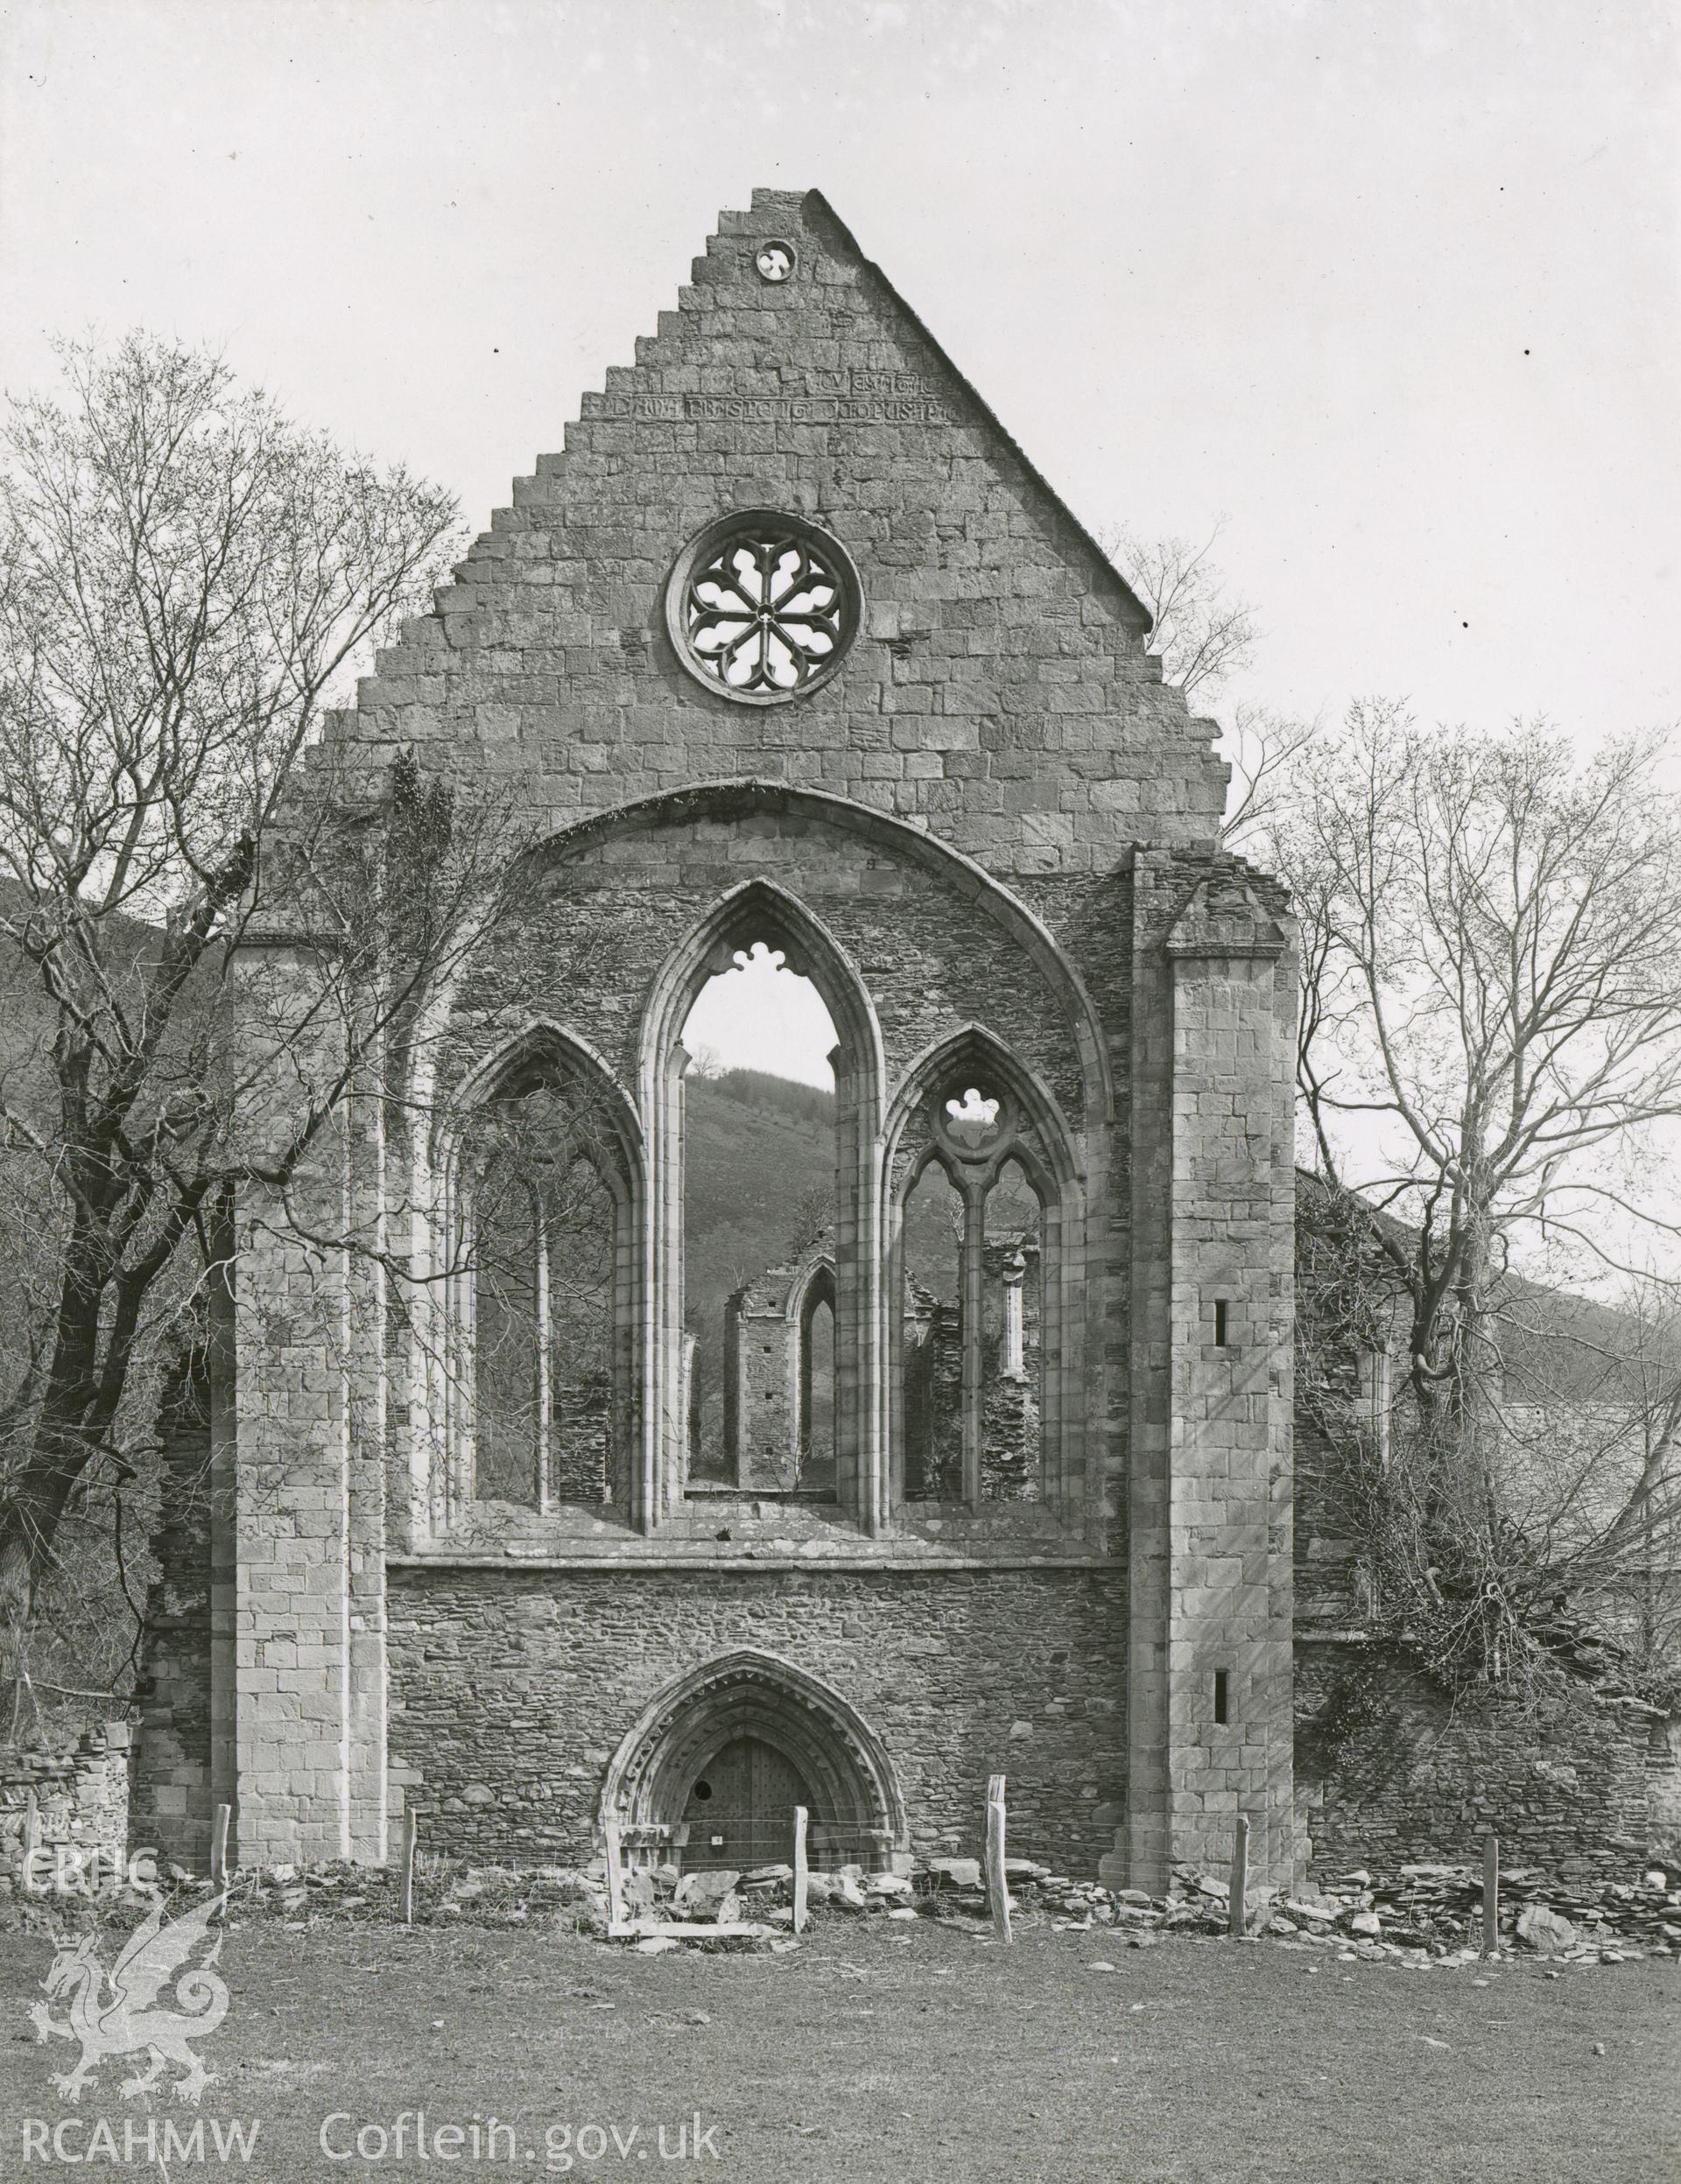 Digitised copy of a black and white print showing west front of church at Valle Crucis Abbey taken by F.H. Crossley, 1947. Negative held by NMR England.